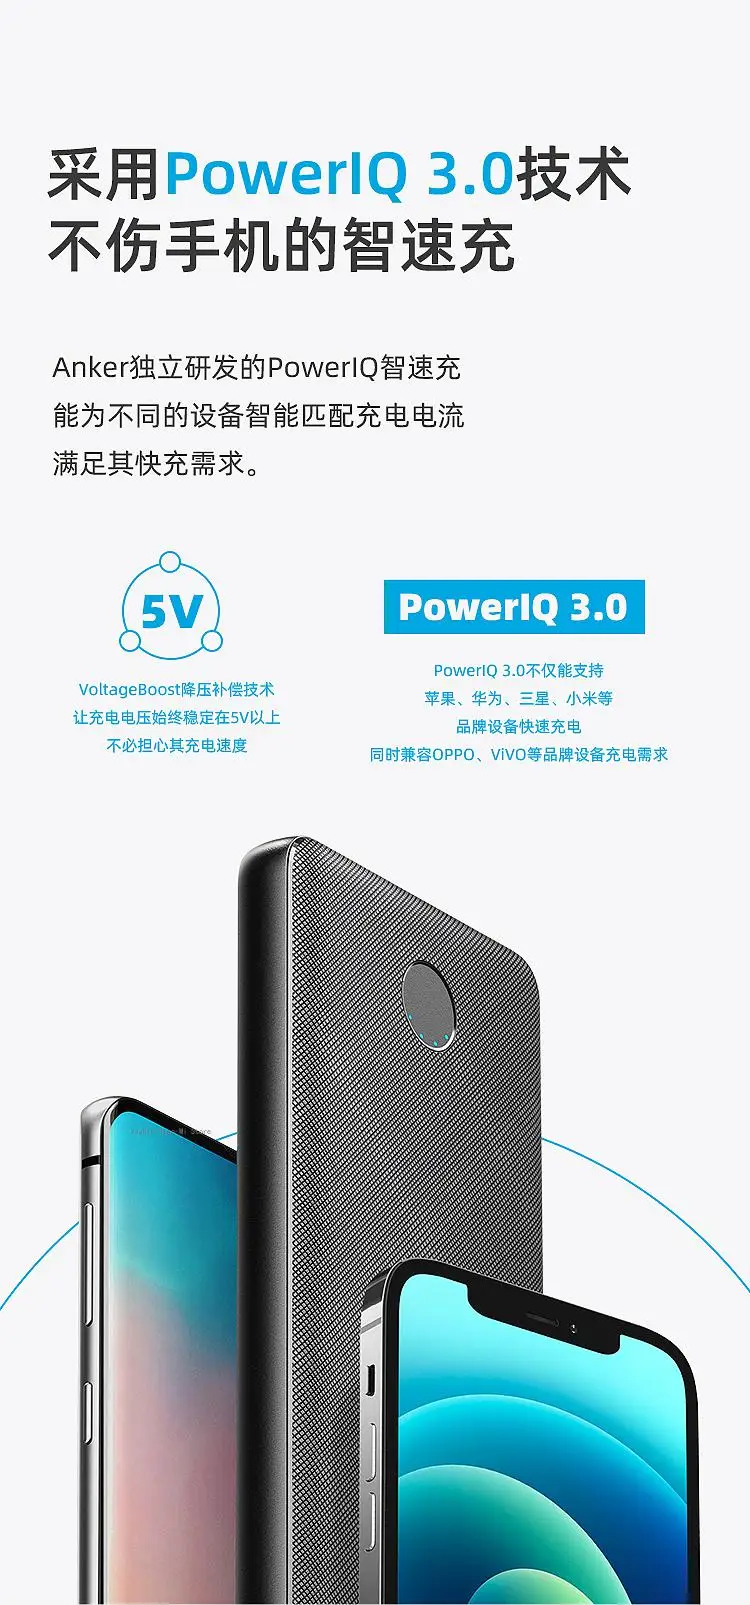 mobile power bank Anker USB C Power Bank, PowerCore Essential 20000 PD (20W) Power Bank, High Cell Capacity 20000mAh Portable Charger Battery Pack portable usb charger